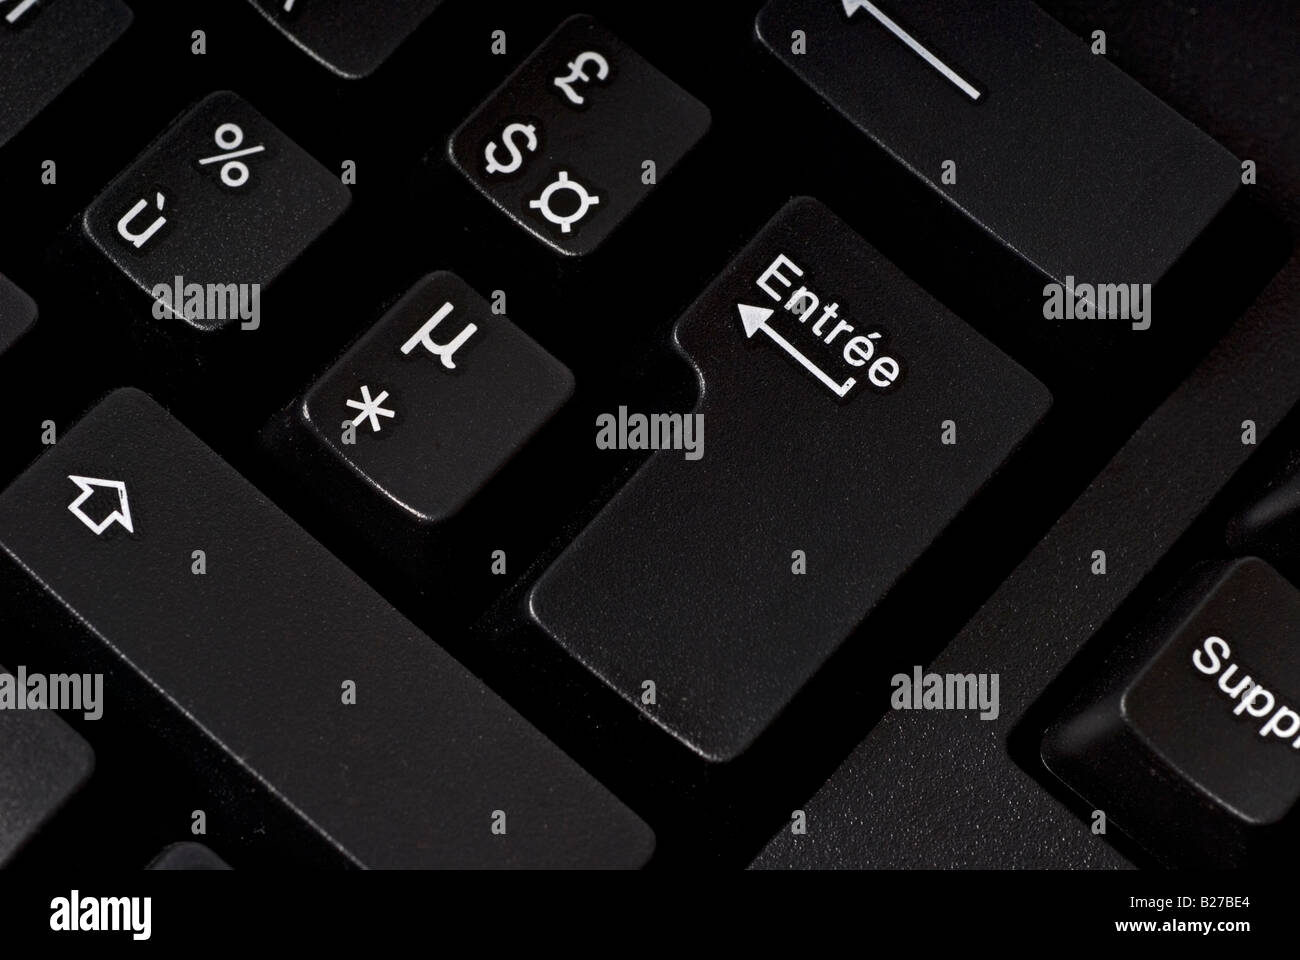 Stock photo of the French Entree key on a French layout computer keyboard Stock Photo